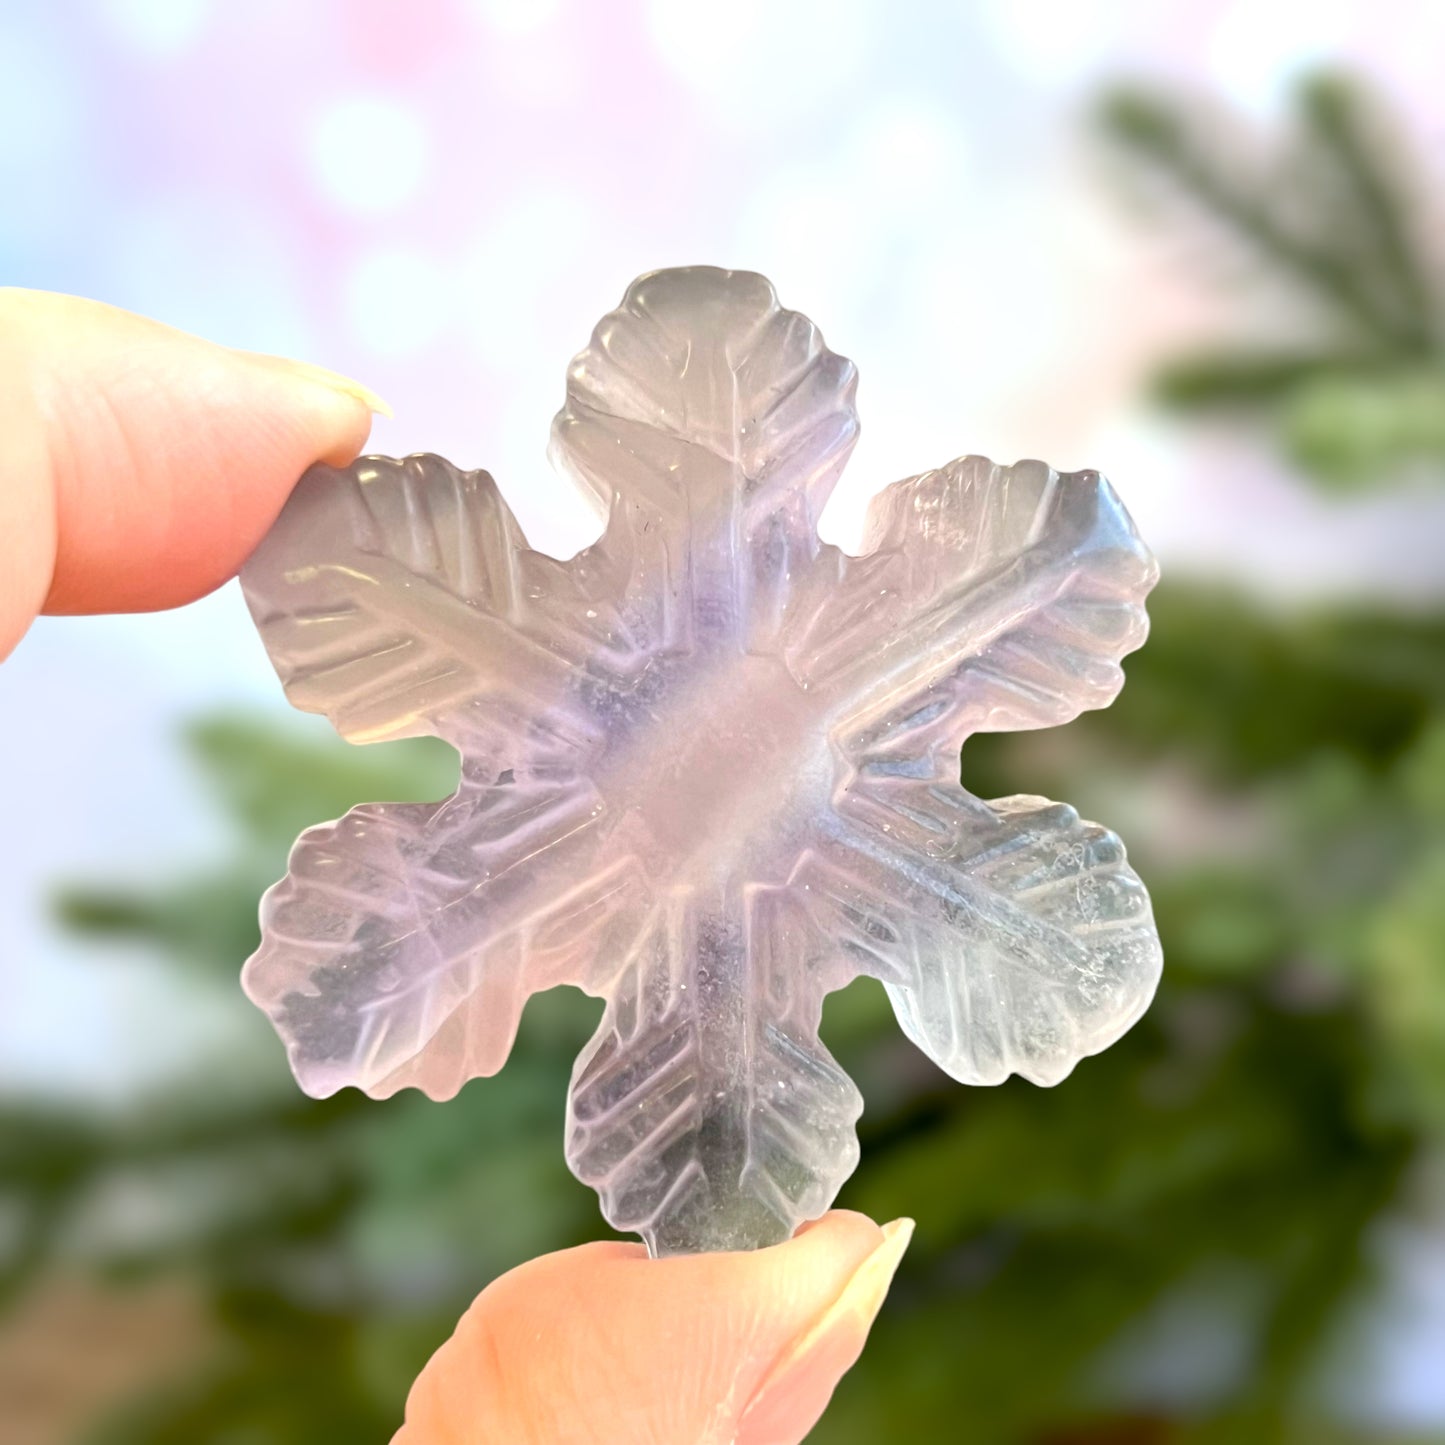 Snowflake Purple Fluorite Crystal Carved Cabochon